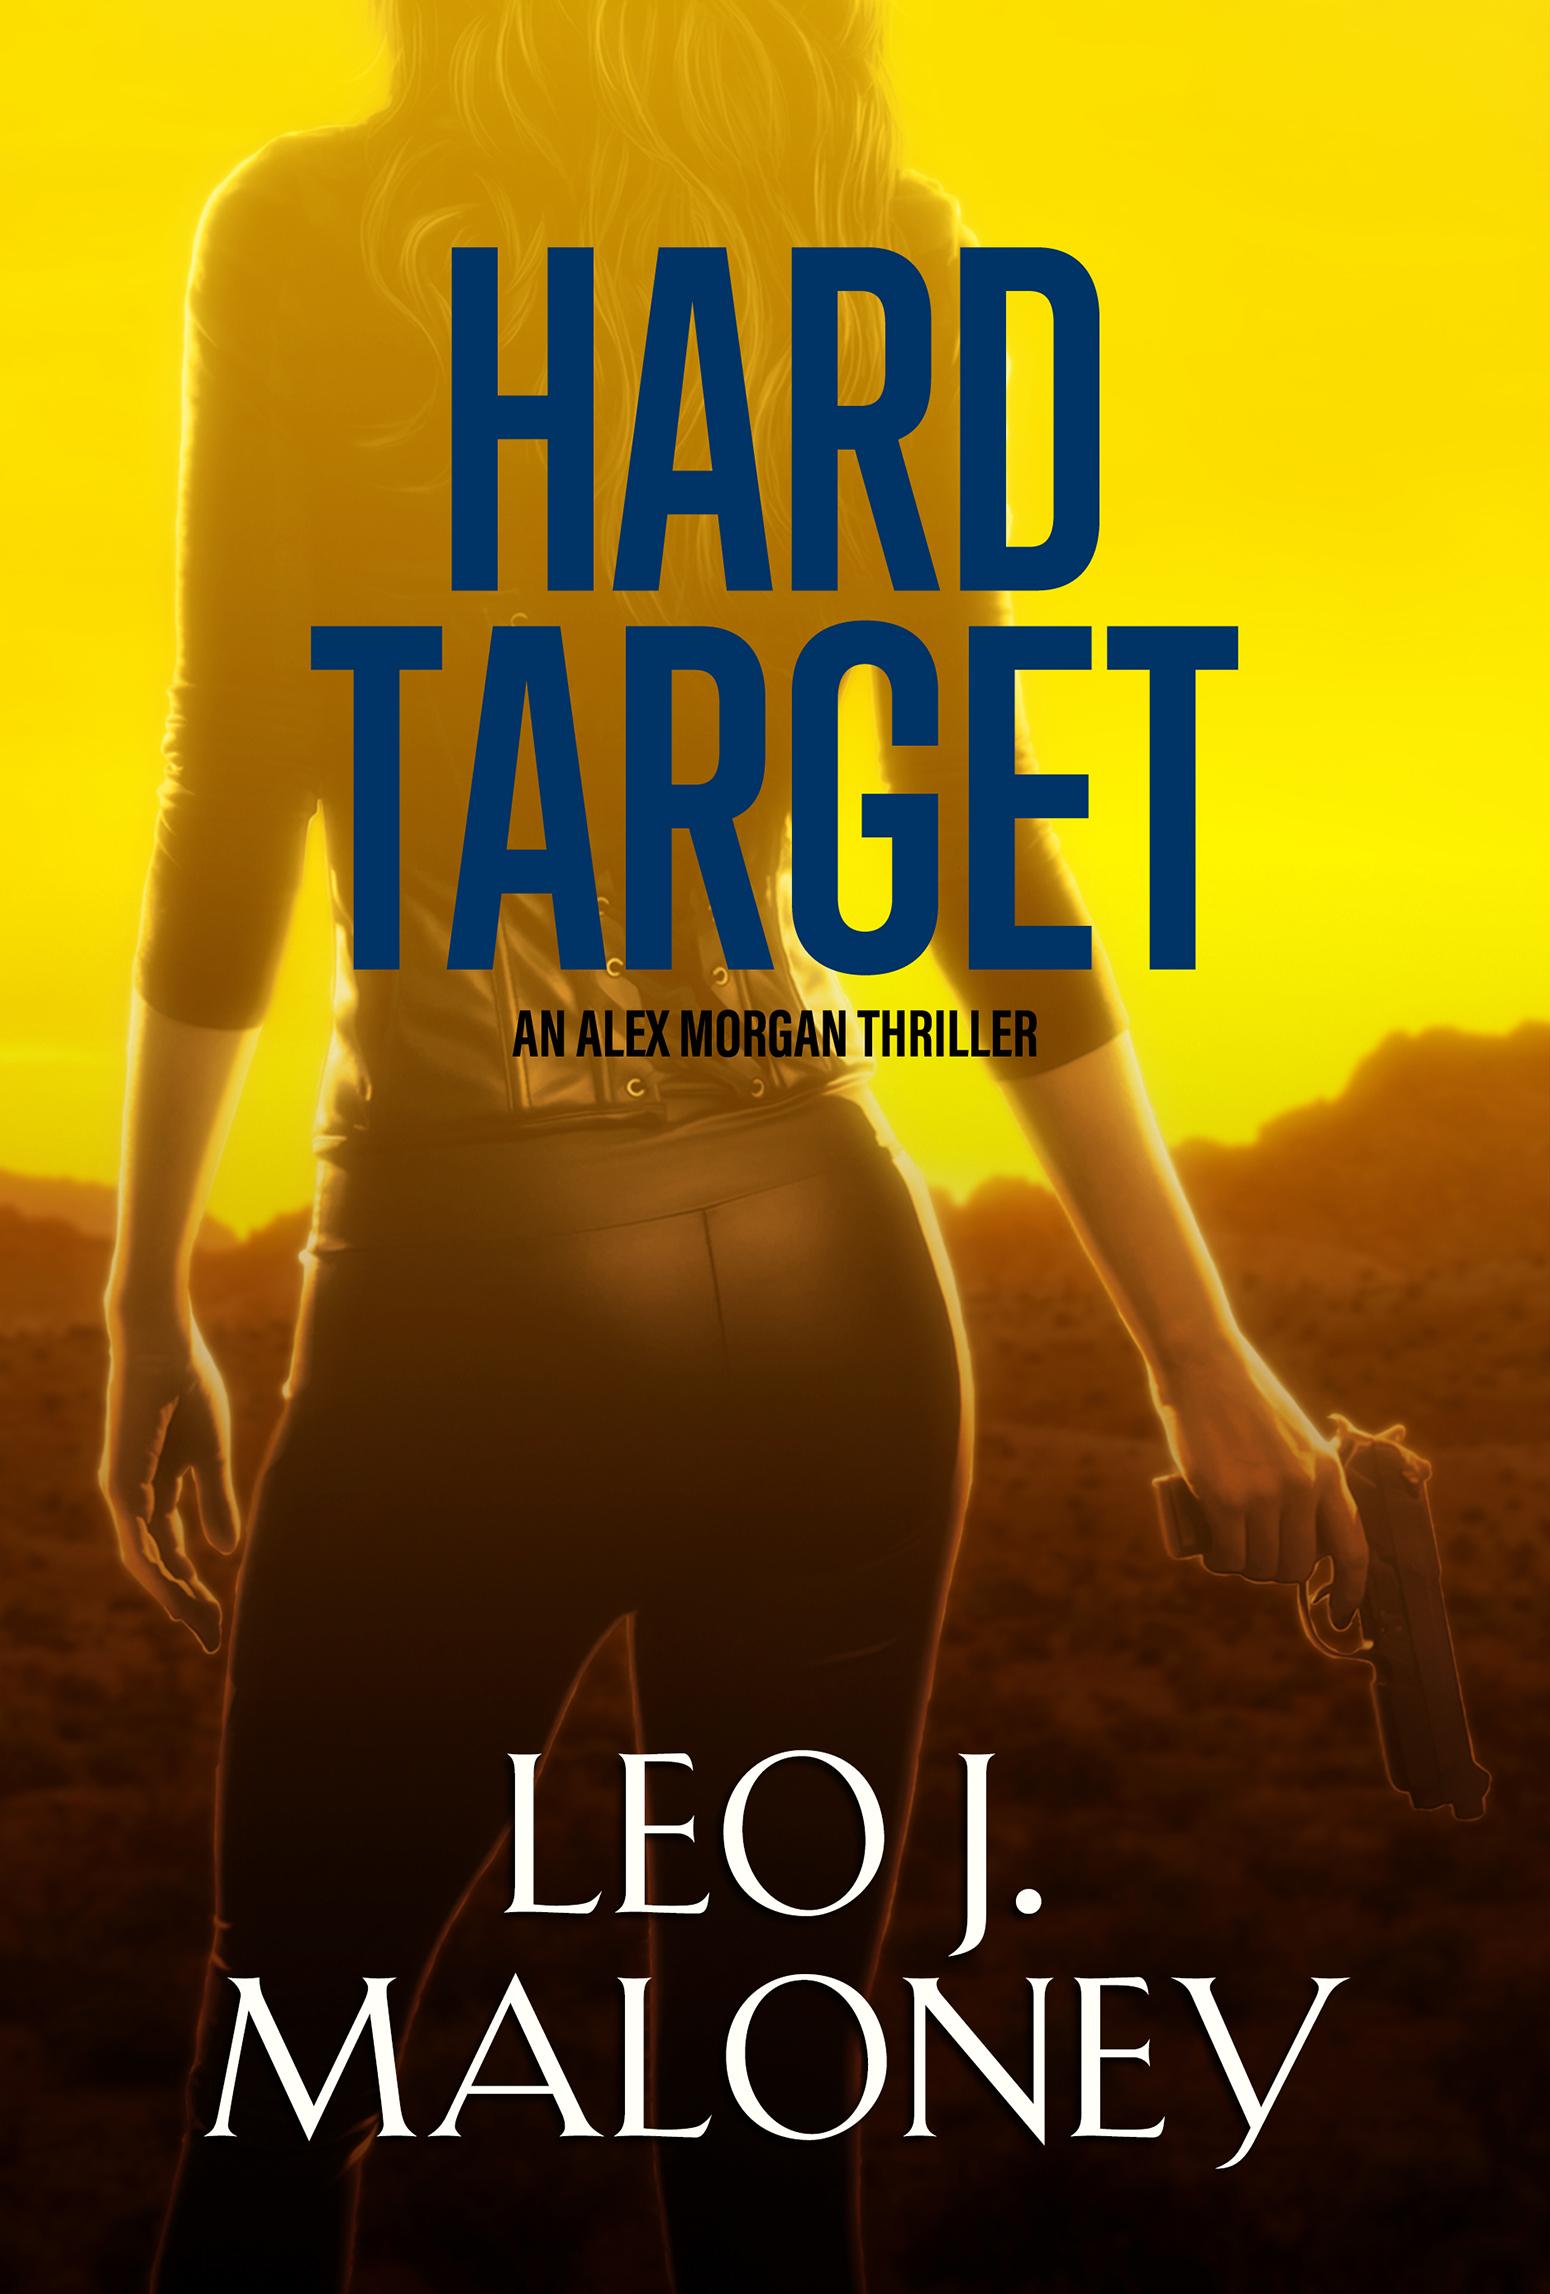 Series Book Cover Preview